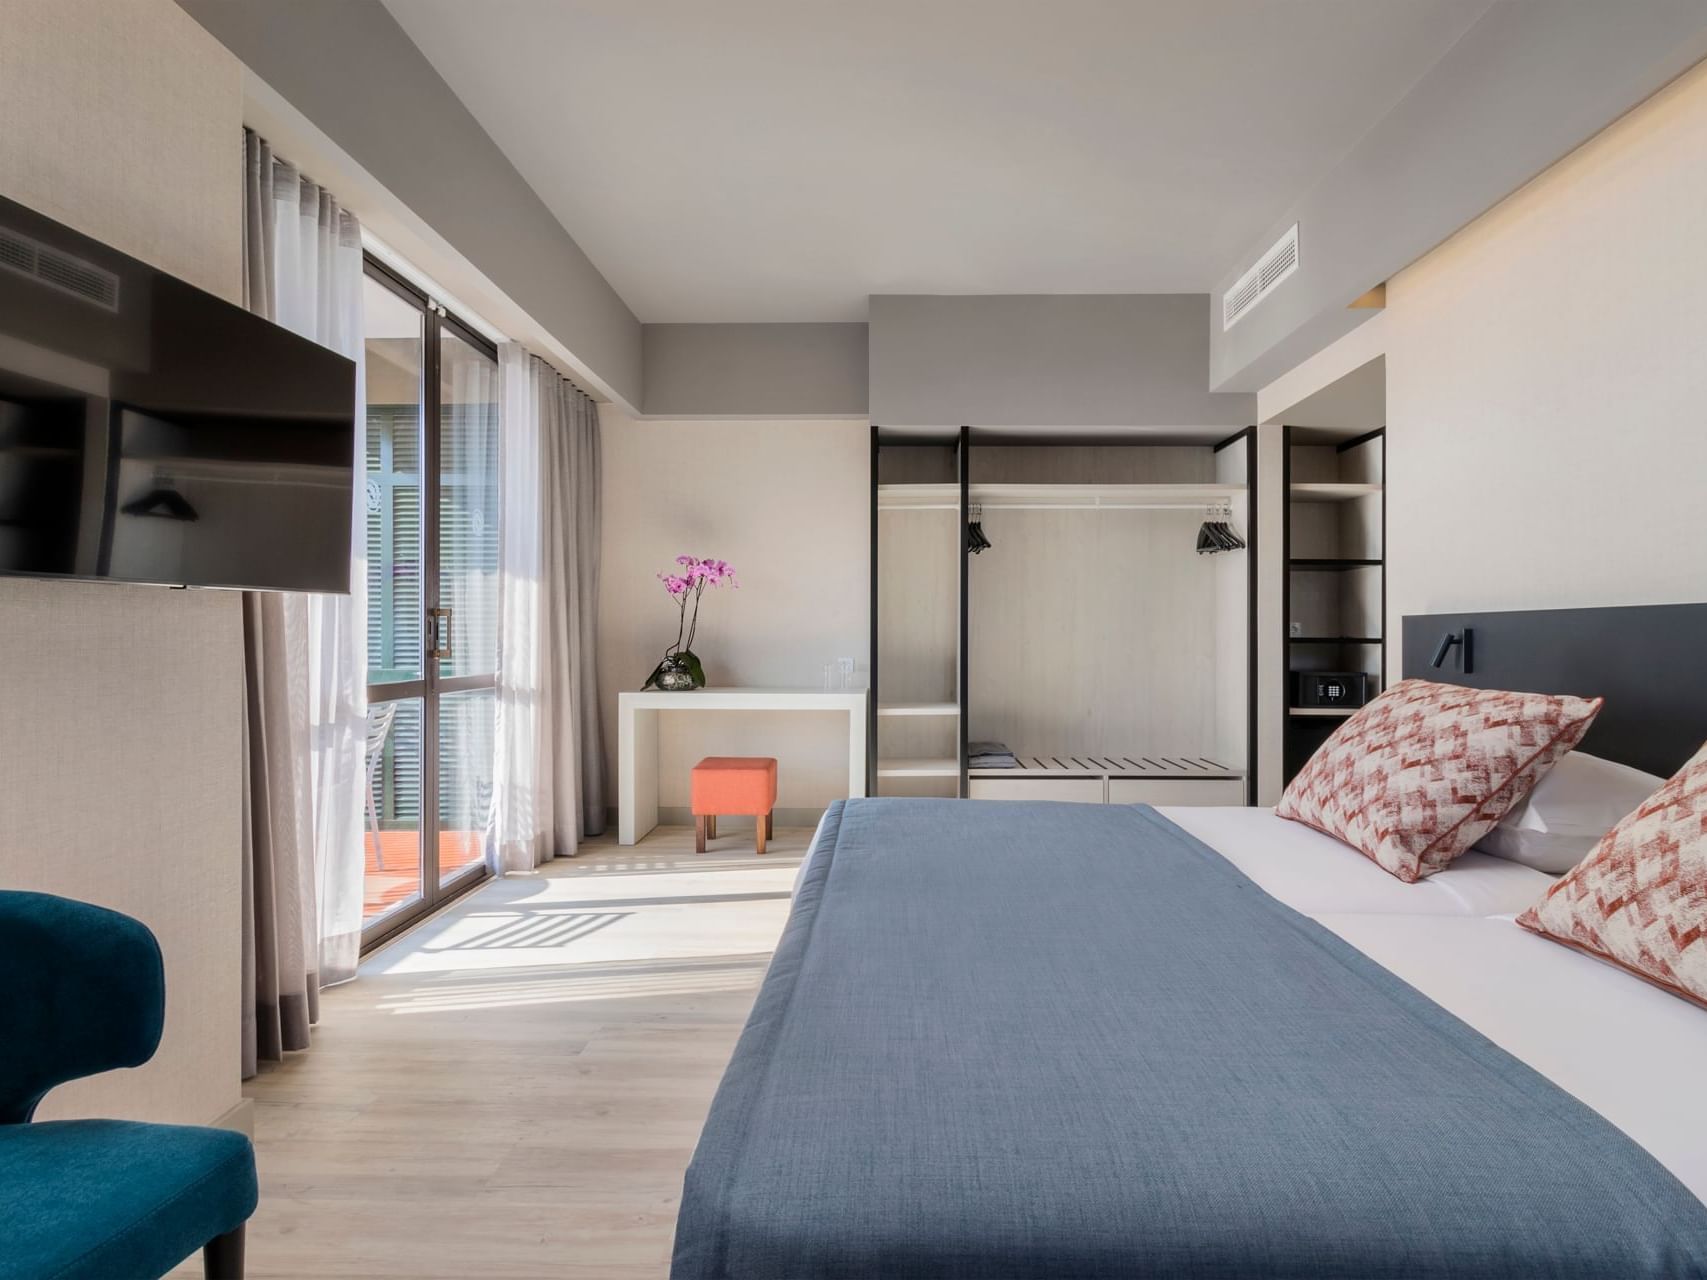 Superior Room at Enotel Magnólia in Funchal, Madeira